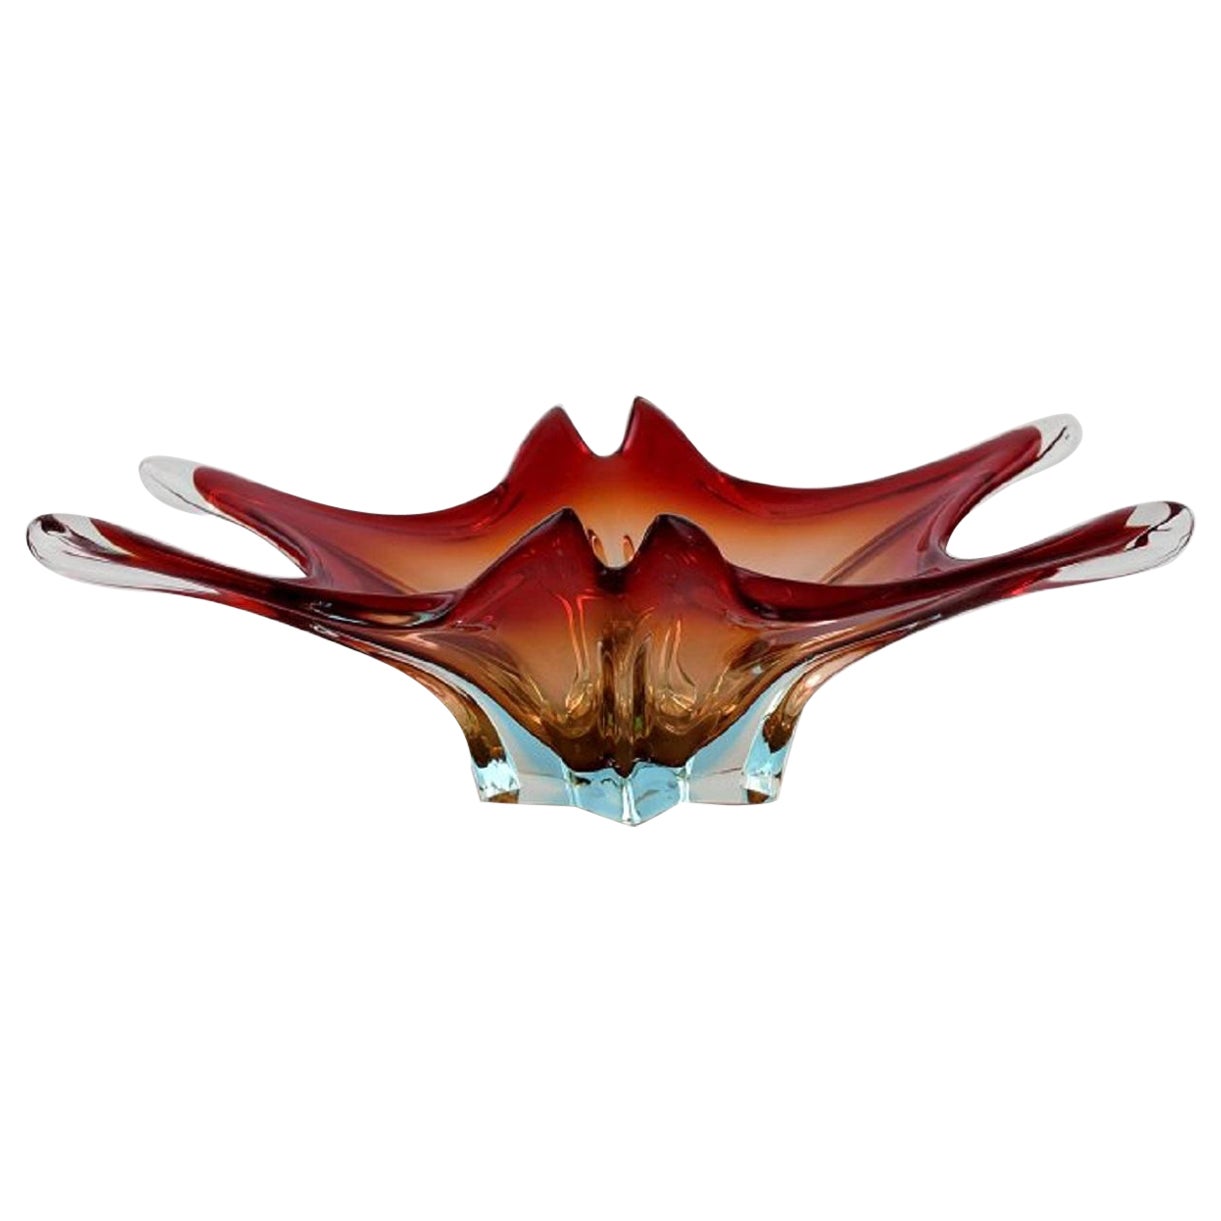 Large Murano Bowl in Reddish and Clear Mouth Blown Art Glass, 1960s / 70s For Sale